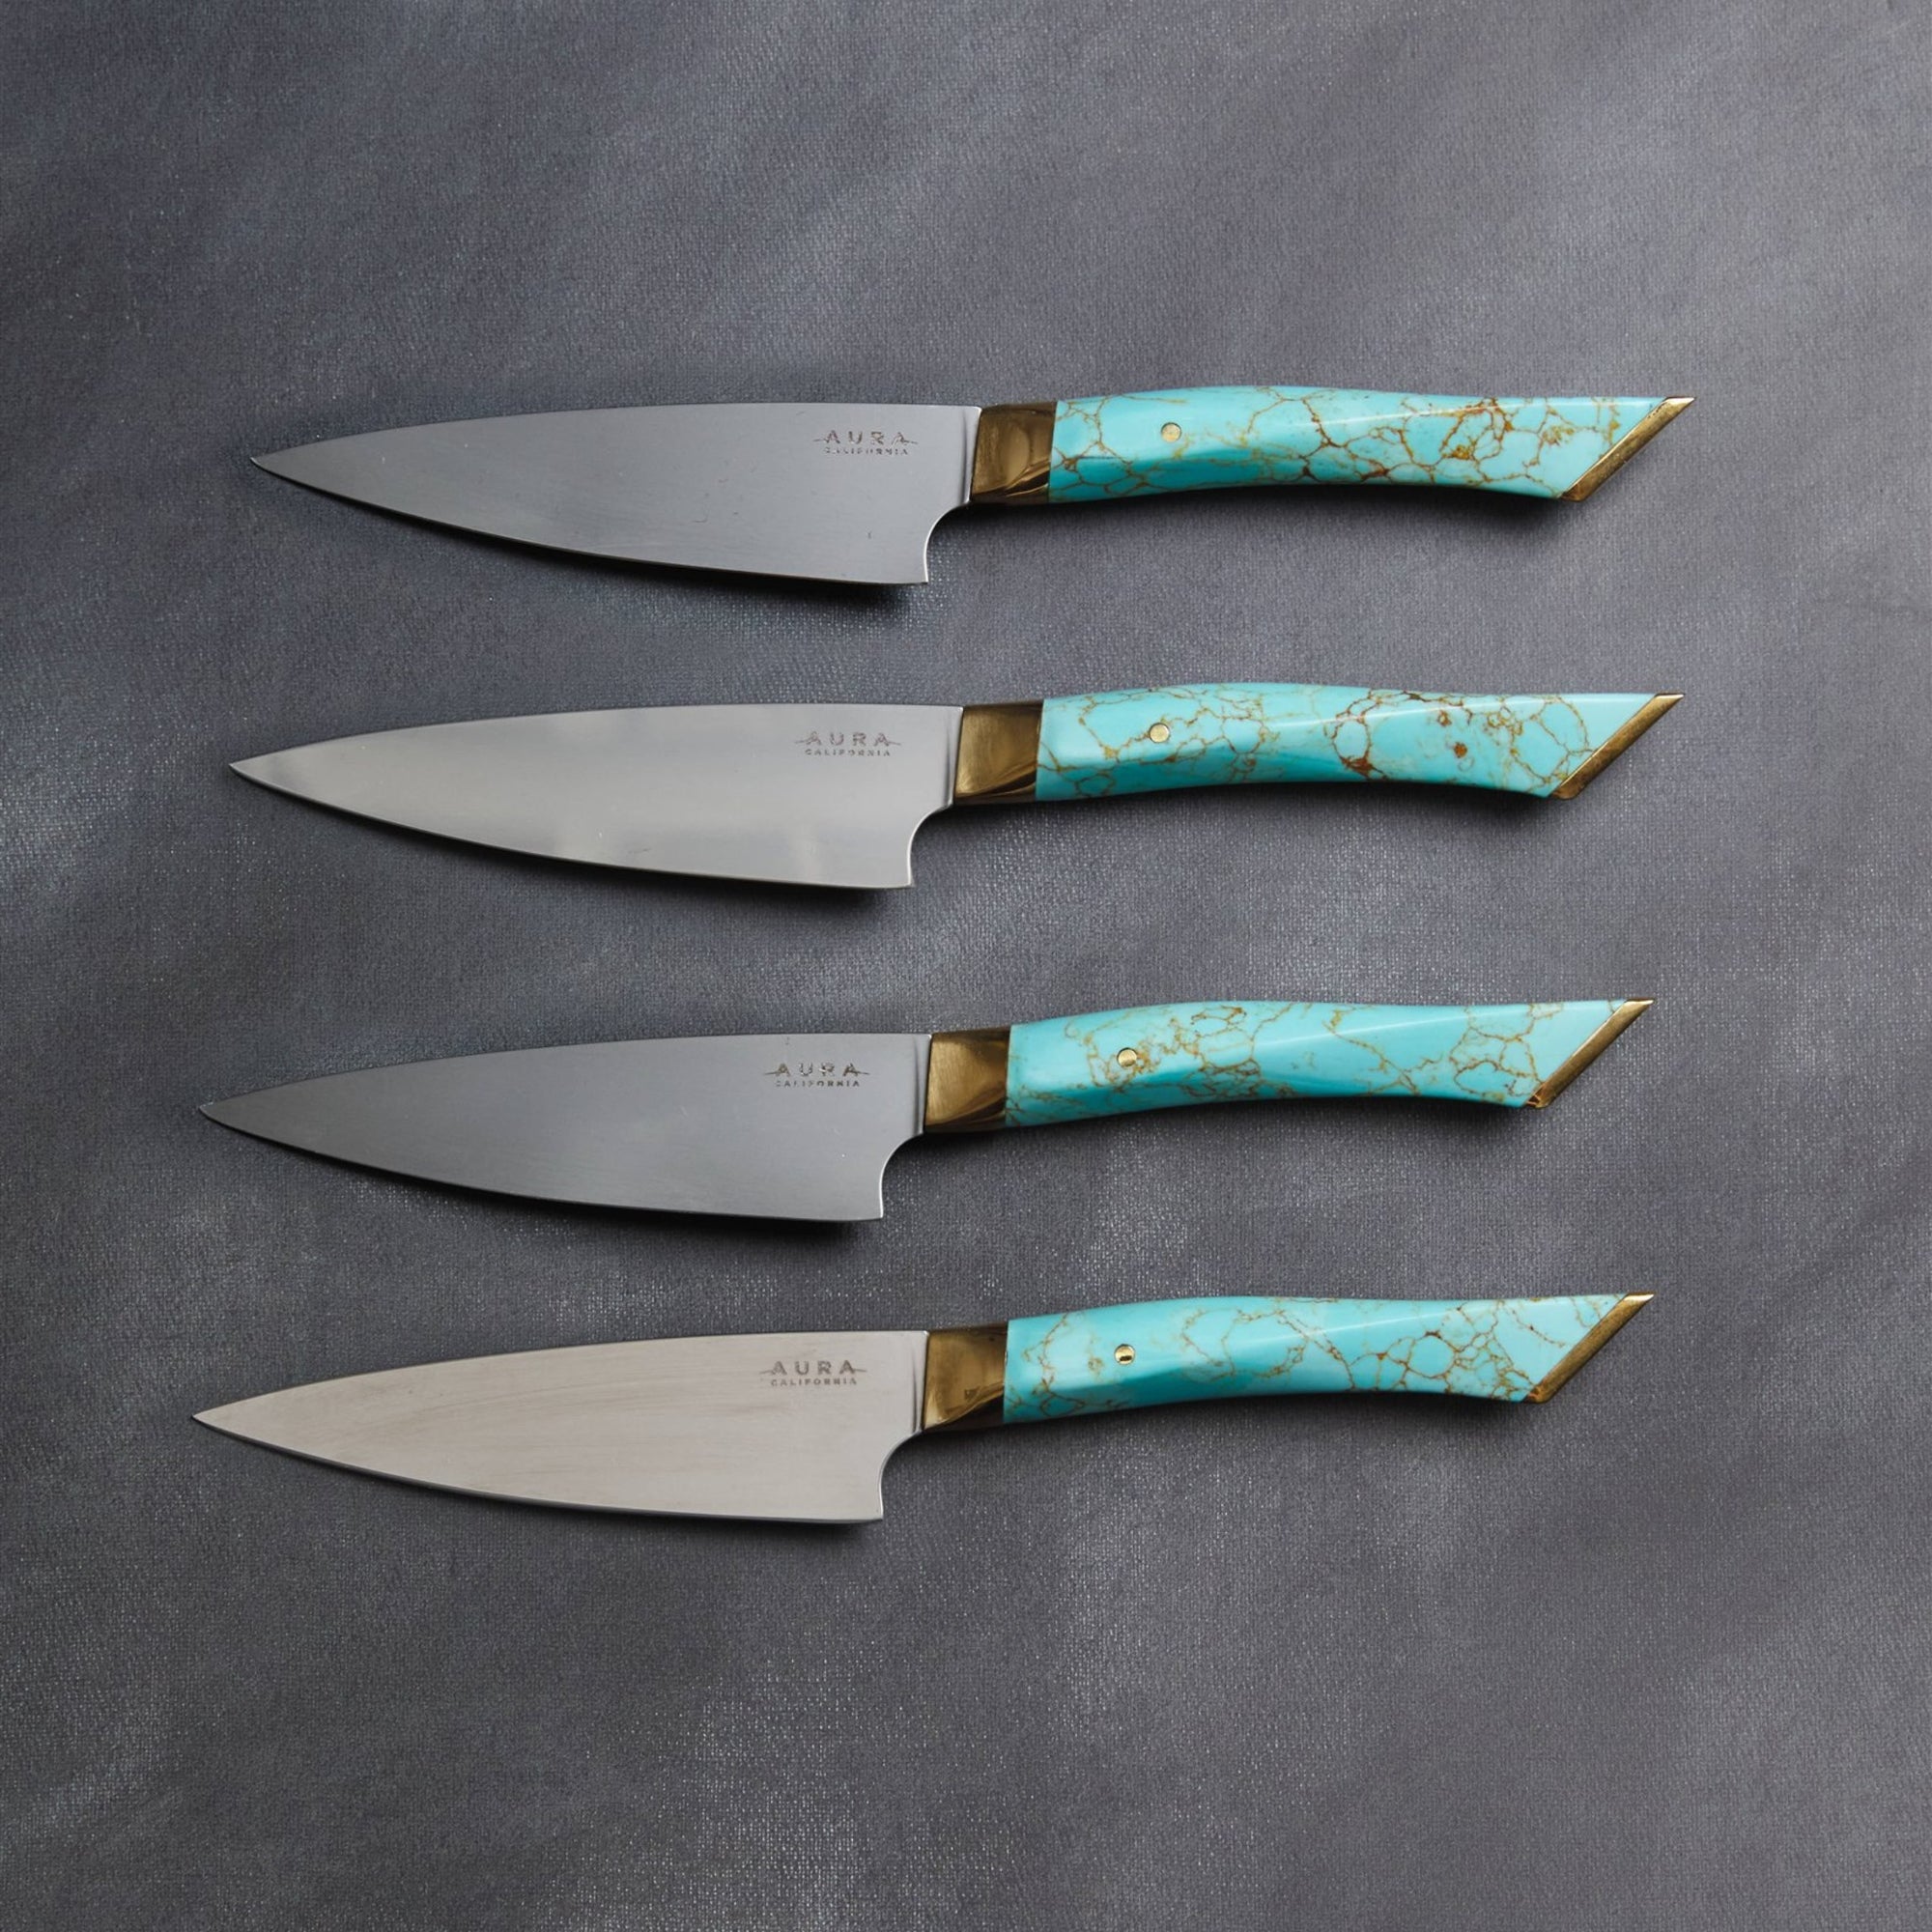 alta california steak knives with a turquoise handle.